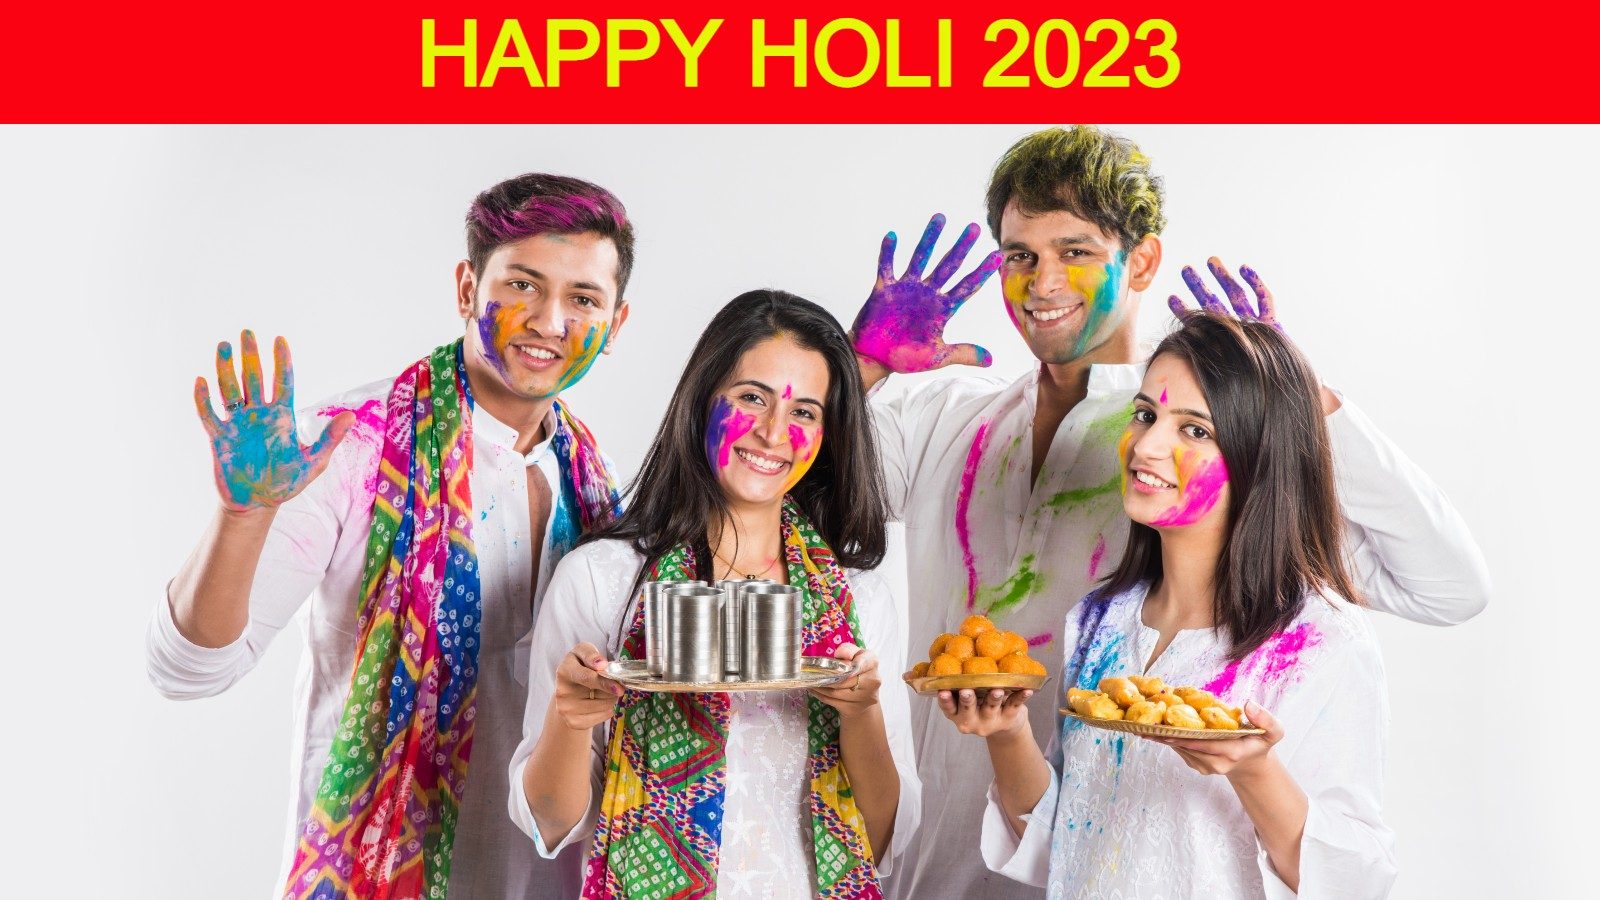 Happy Holi 2023: Best 50 SMS, Messages and WhatsApp Wishes in English, Hindi, Tamil, Telugu, Kannada and Marathi